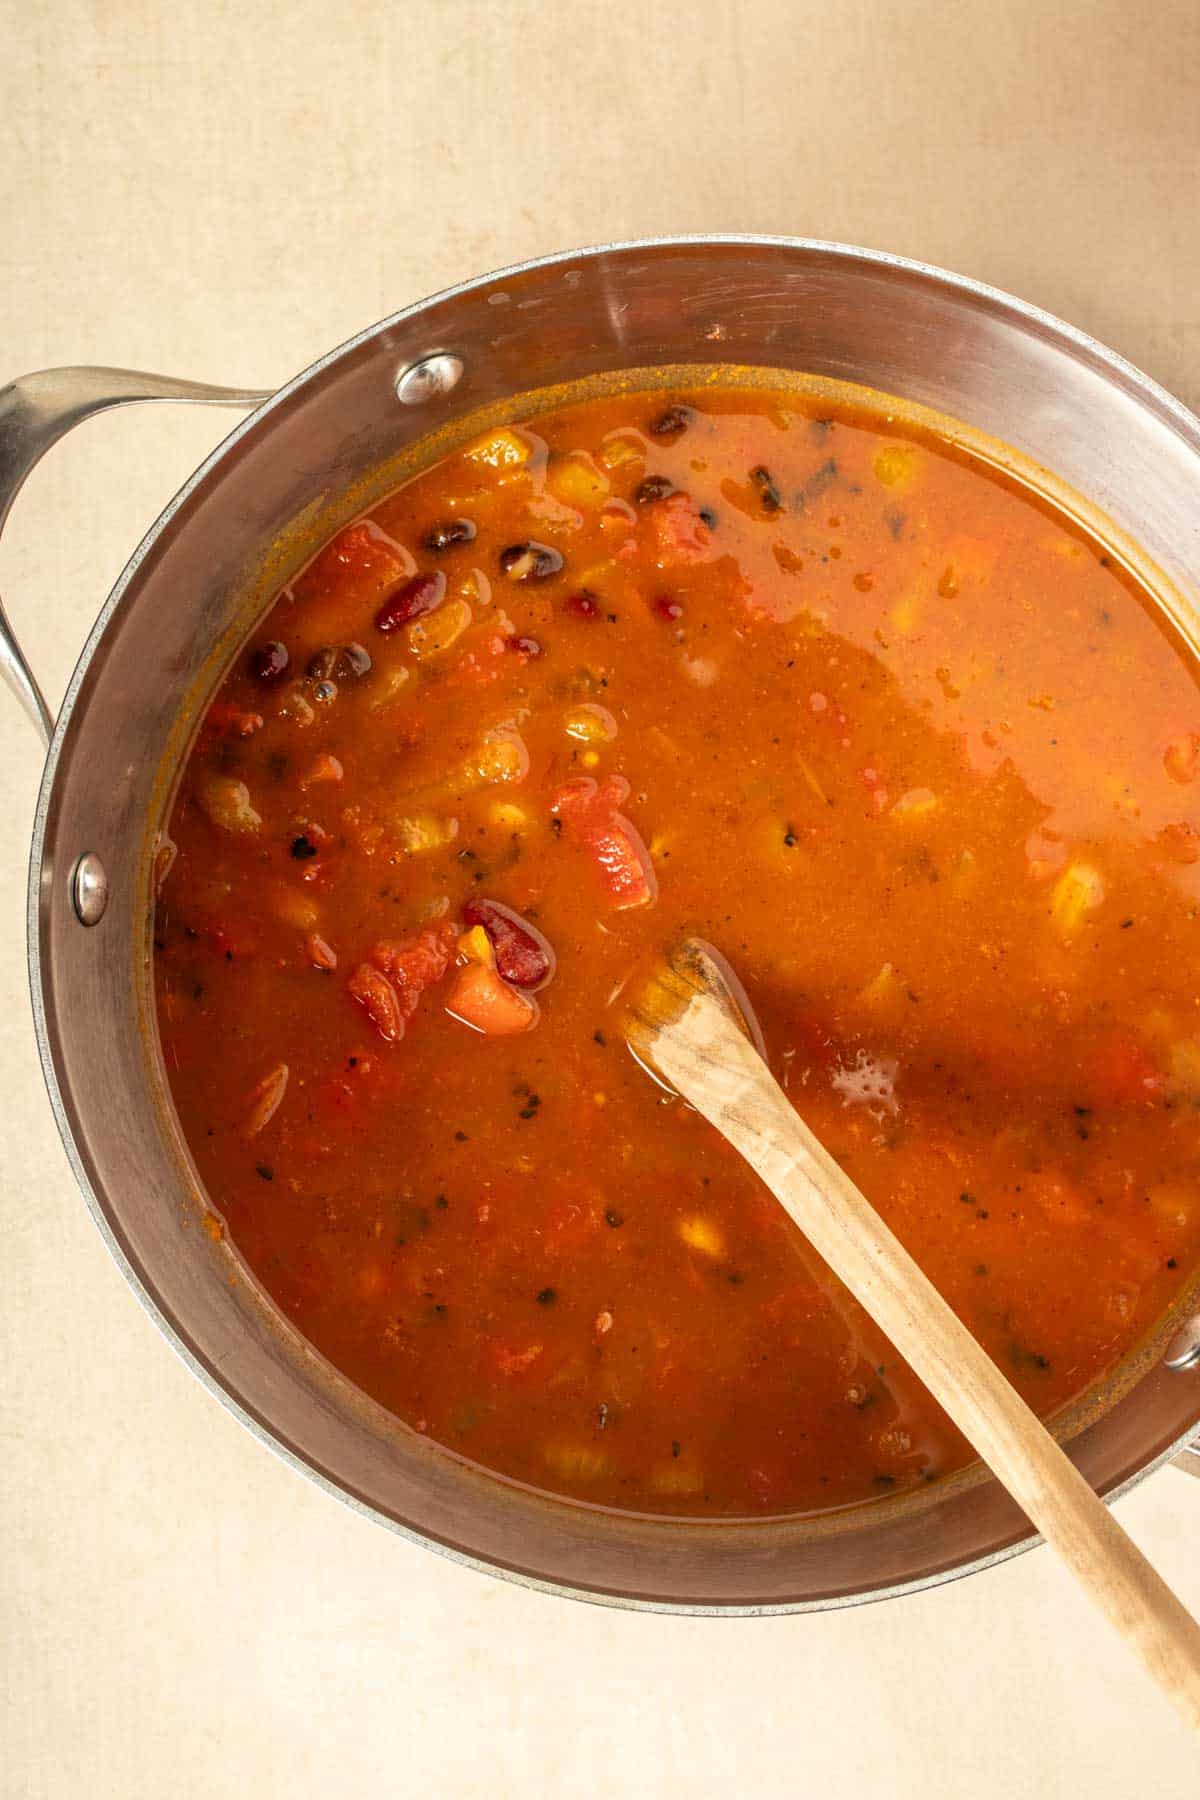 A pot with a red broth and beans and veggies in it being mixed with a wooden spoon.